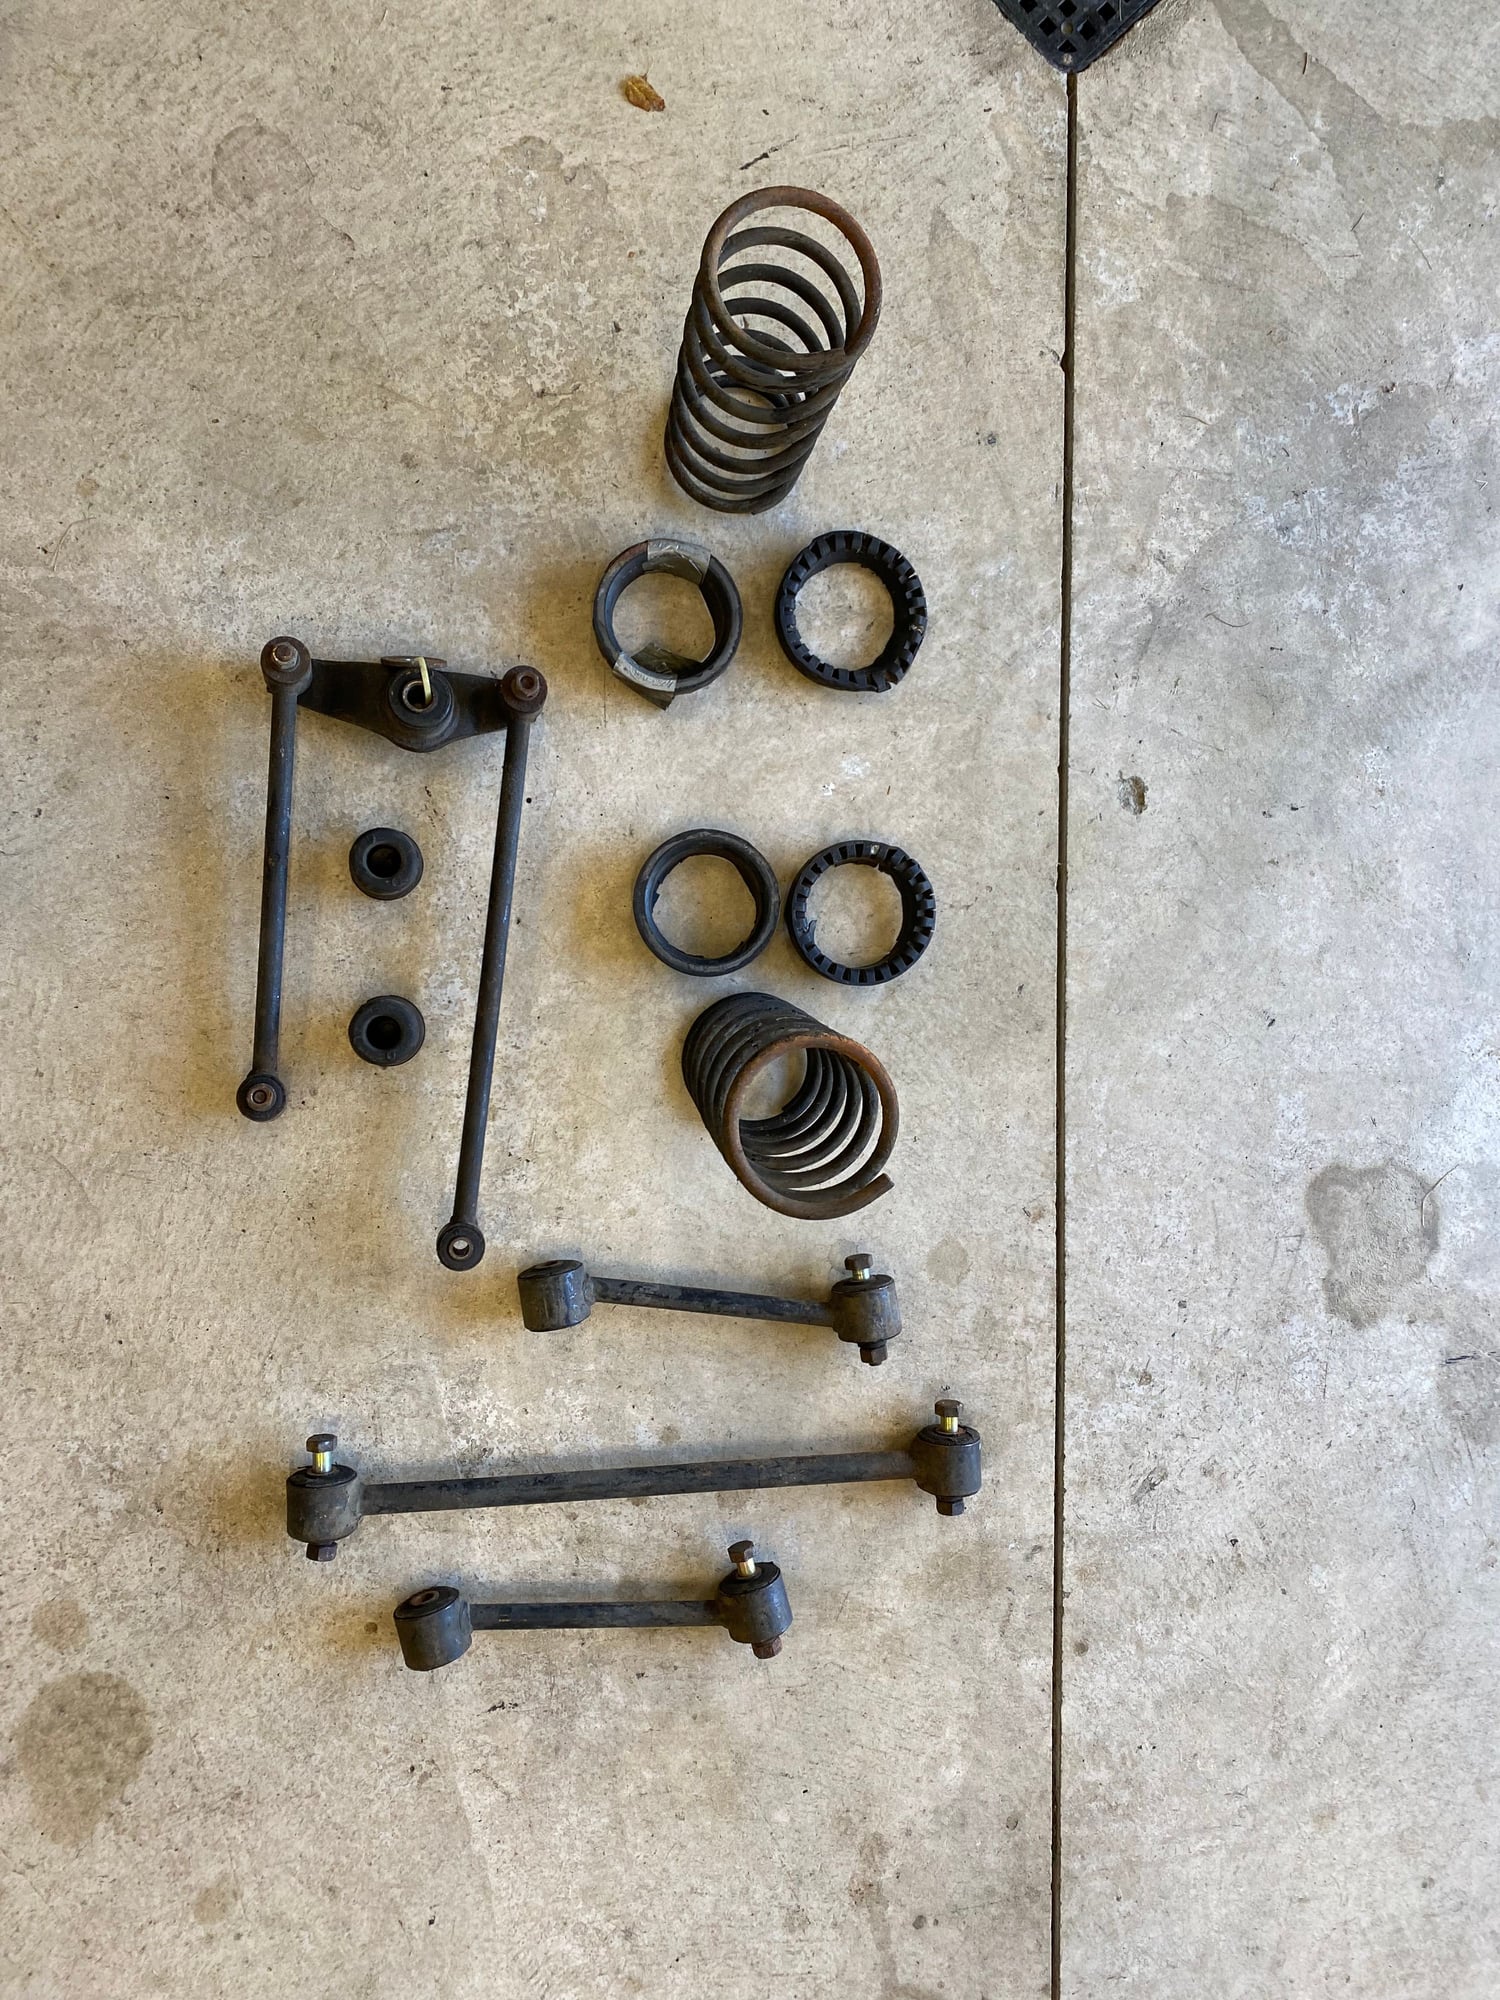 Steering/Suspension - Stock front and rear suspension parts - Used - 1979 to 1985 Mazda RX-7 - Akron, OH 44321, United States